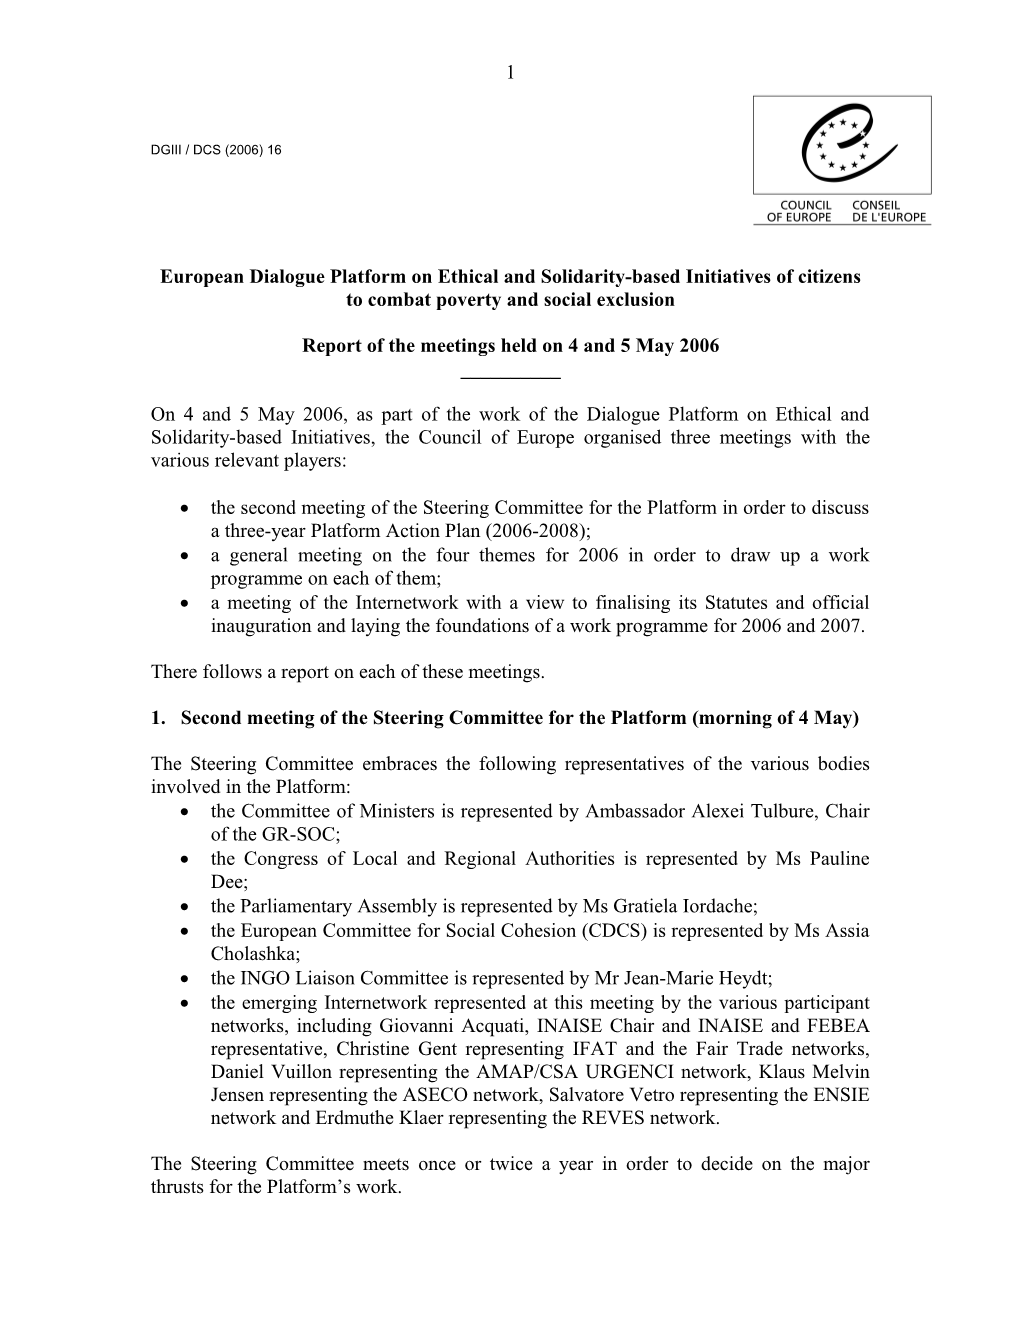 Report of the Meetings Held on 4 and 5 May 2006